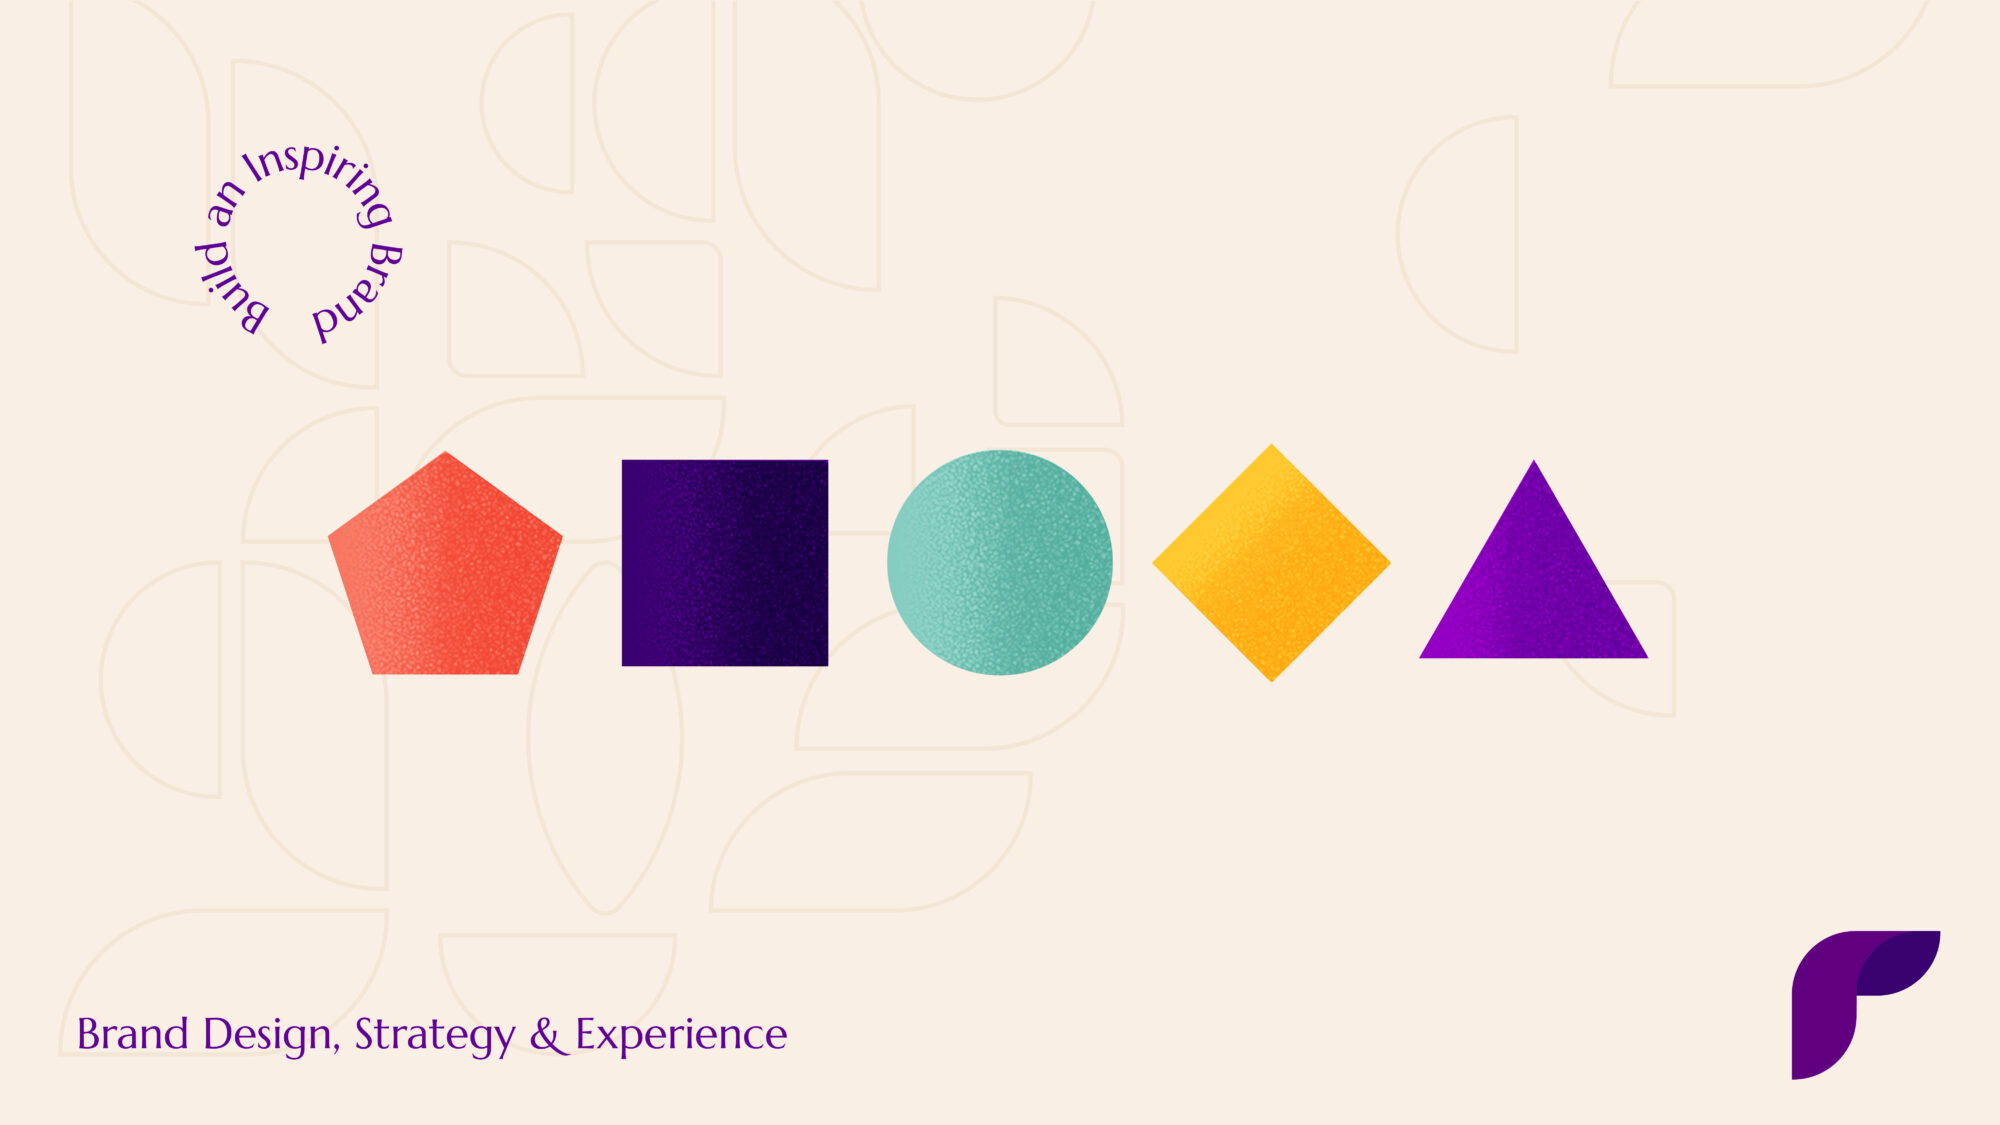 Psychology of shapes in graphic design and how to use them in branding